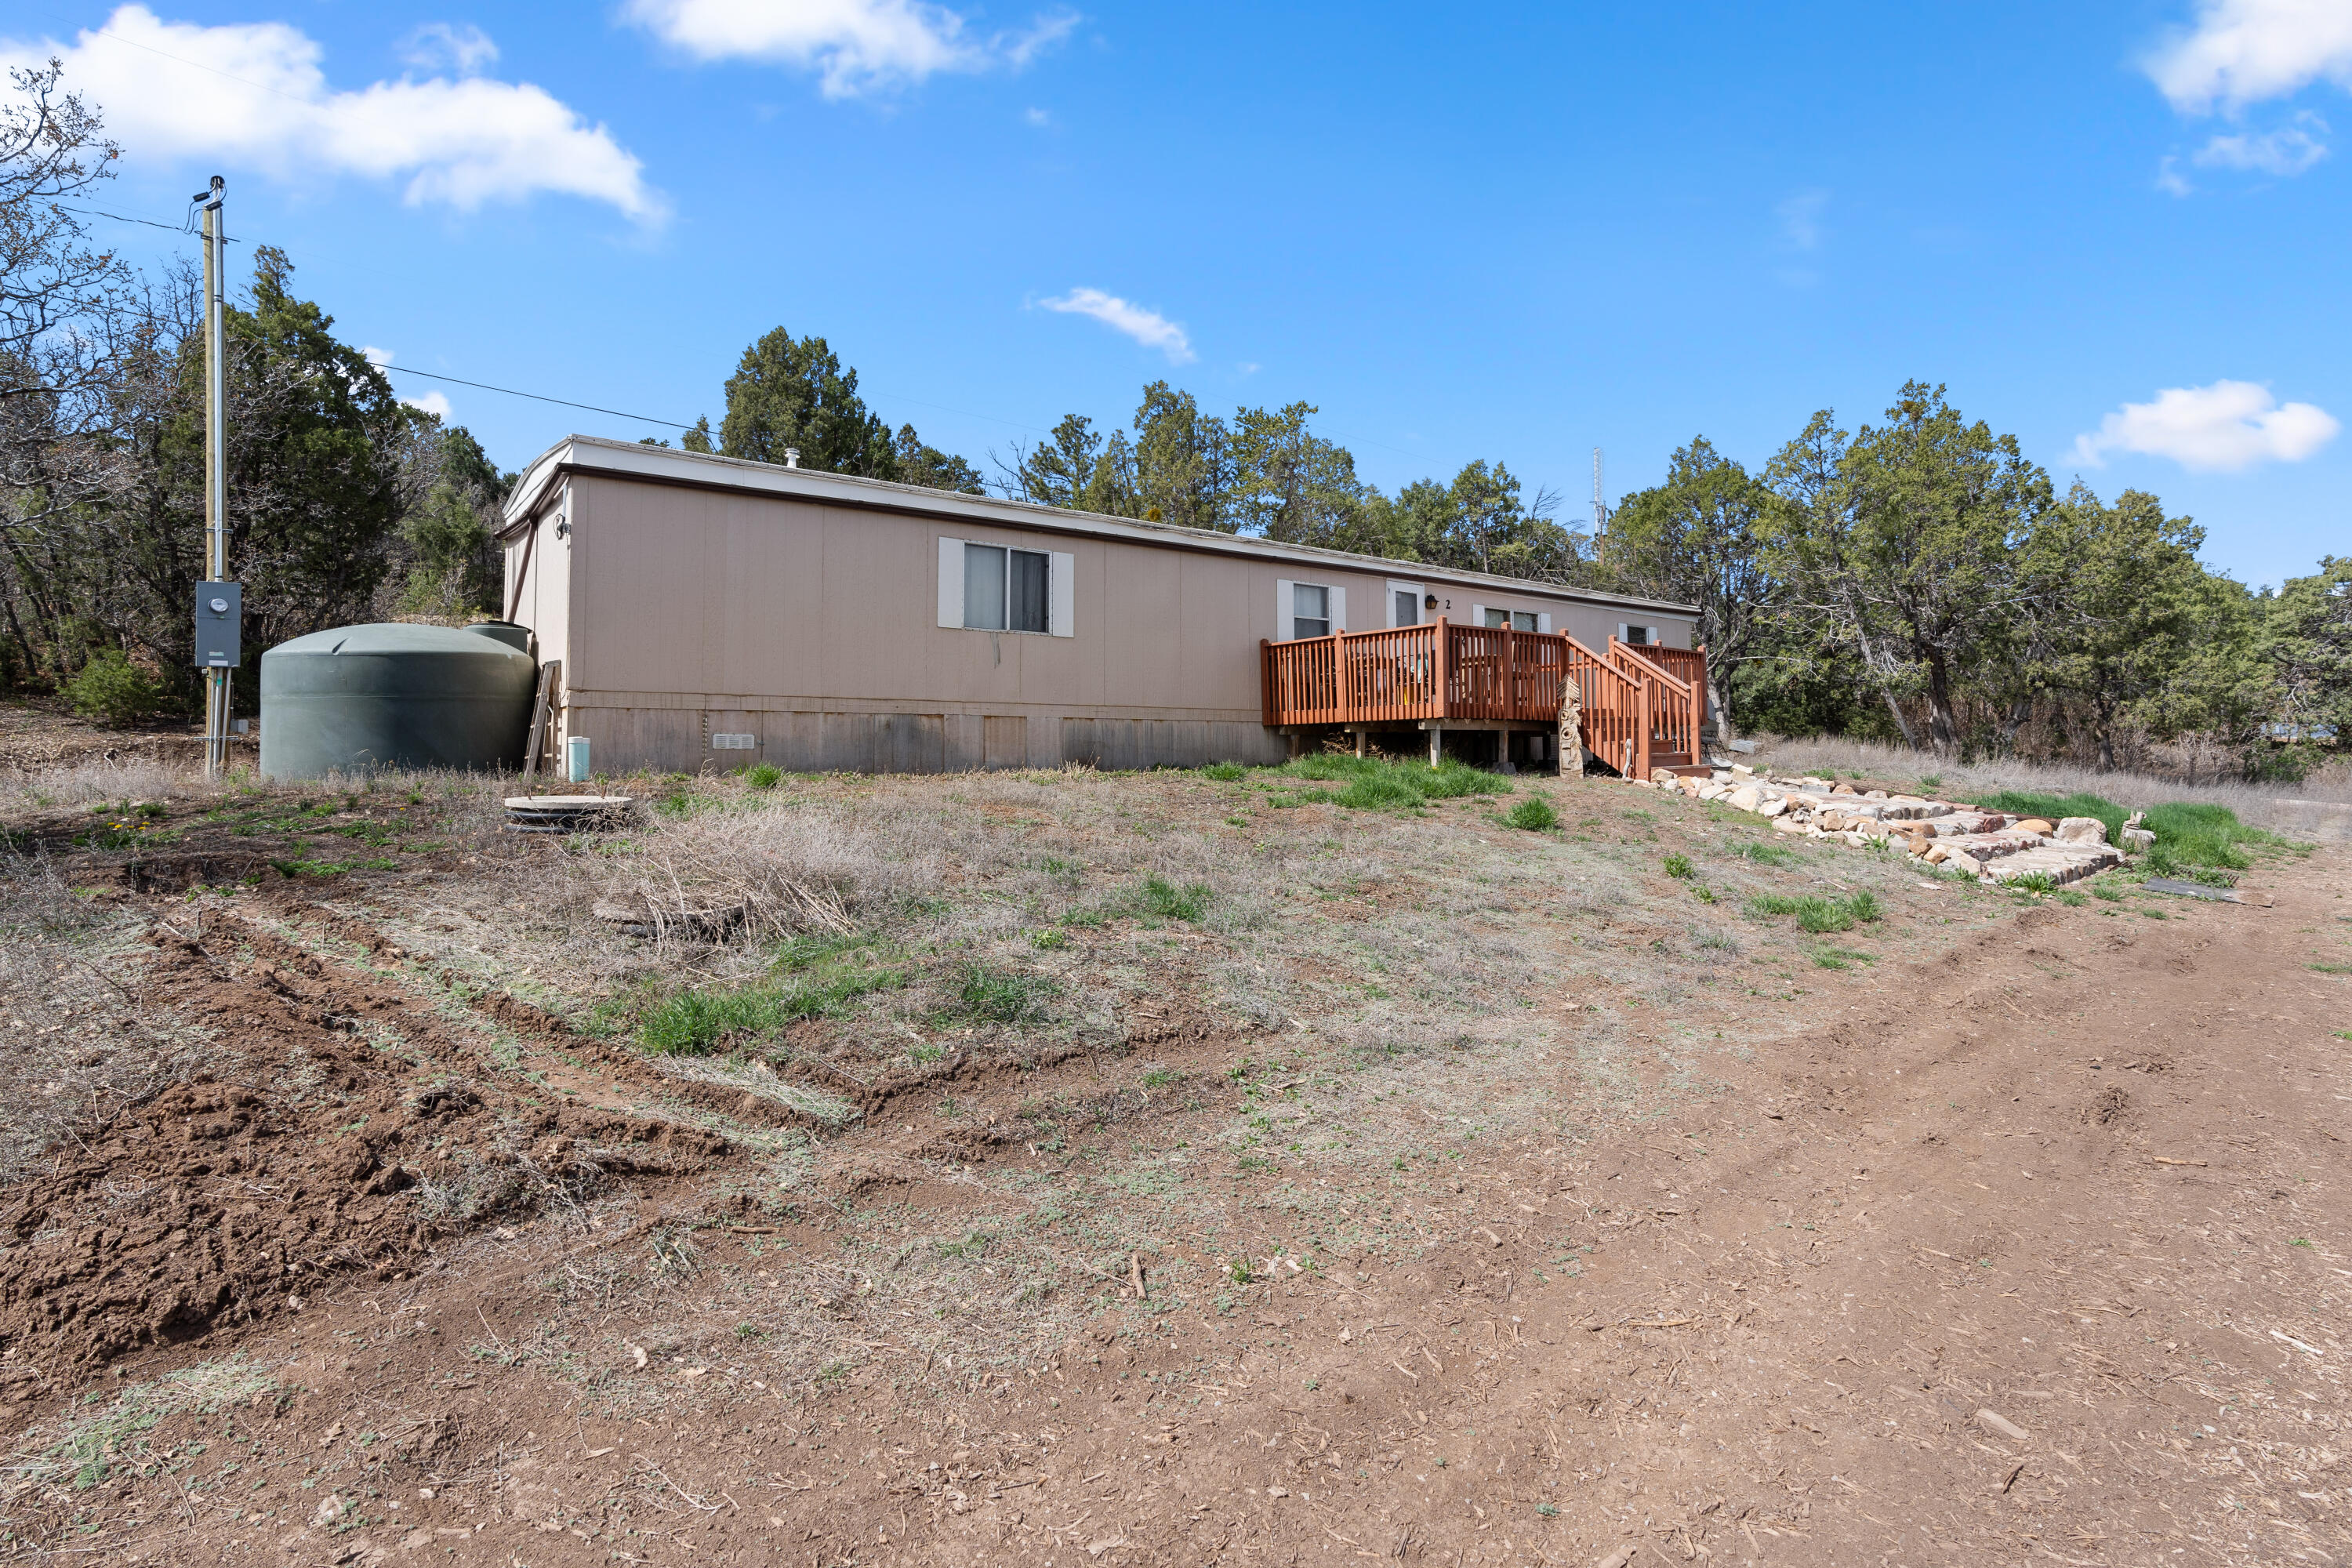 Two bedroom single wide on just over 3/4 of an acre fully fenced located 25 minutes from Albuquerque.